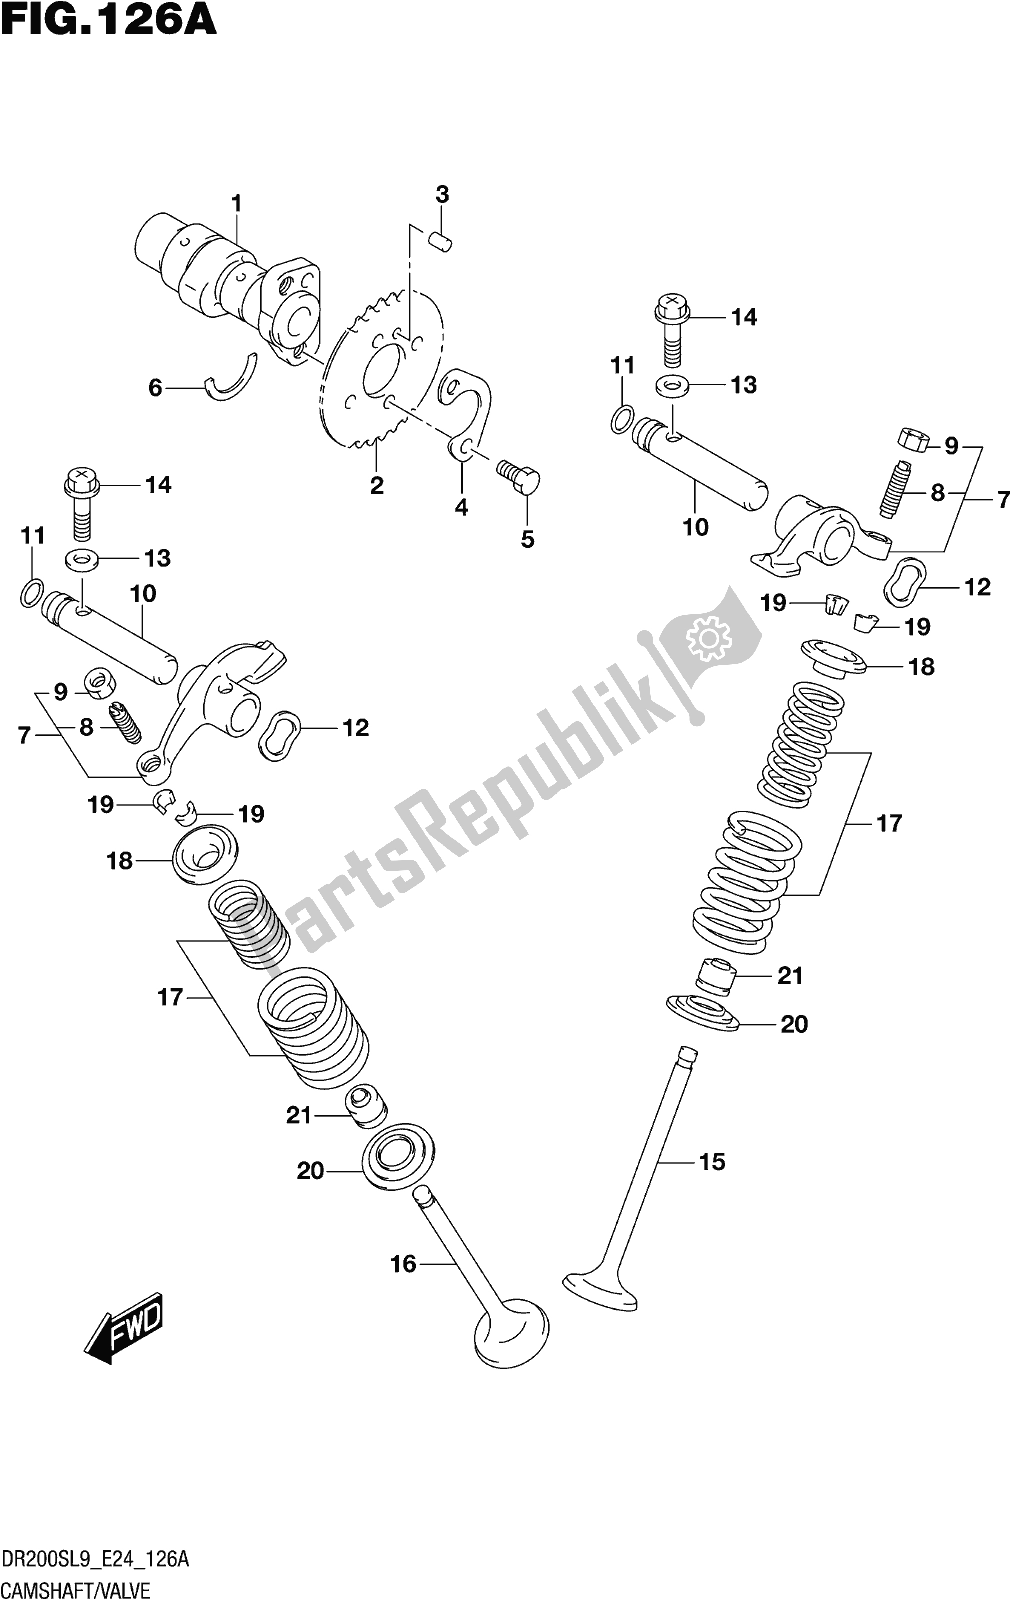 All parts for the Fig. 126a Camshaft/valve of the Suzuki DR 200S 2019